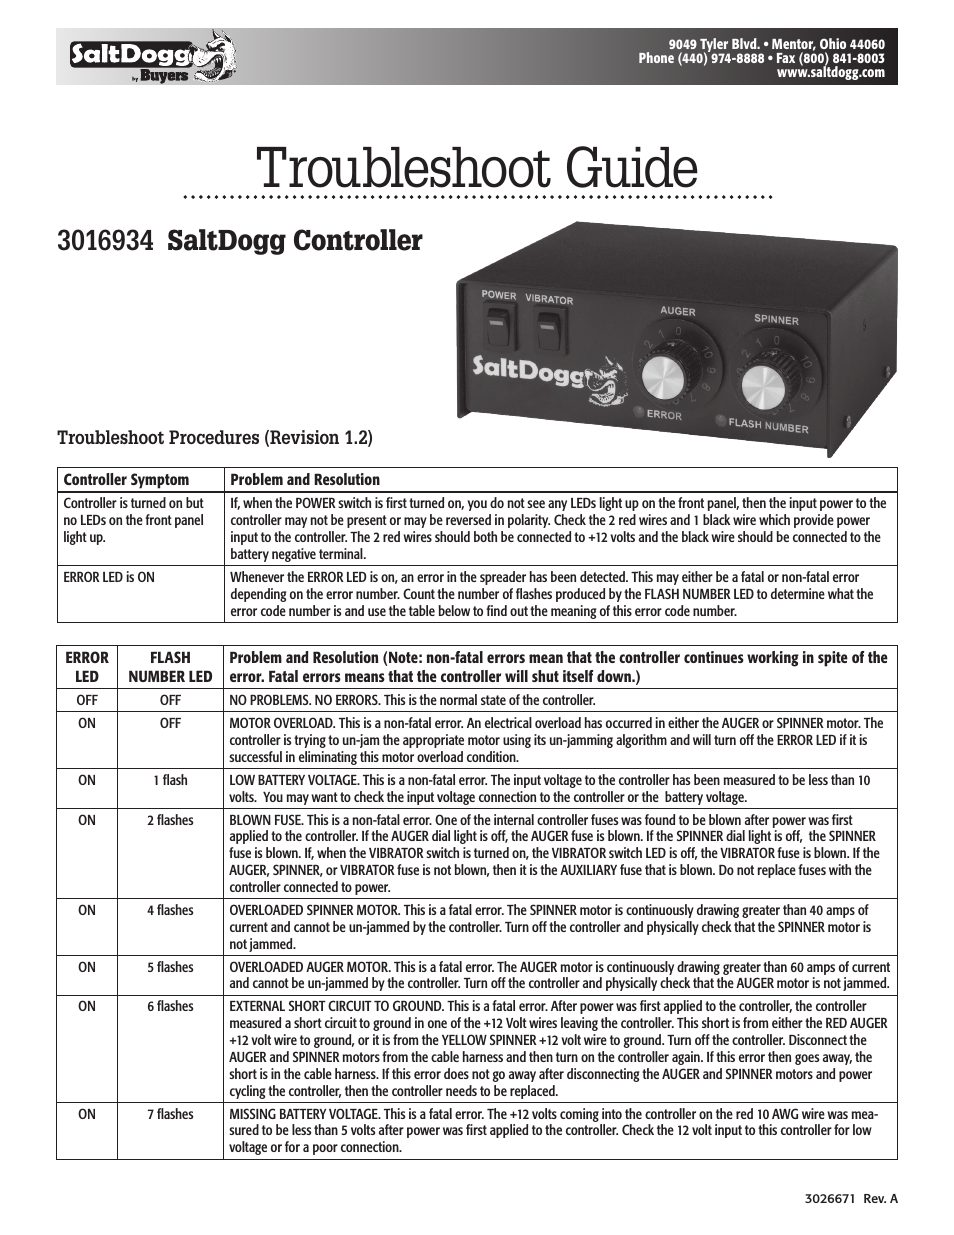 Controller (3016934) Troubleshoot Guide - SHPE2250, SHPE2250RED, SHPE2250YEL, SHPE3000